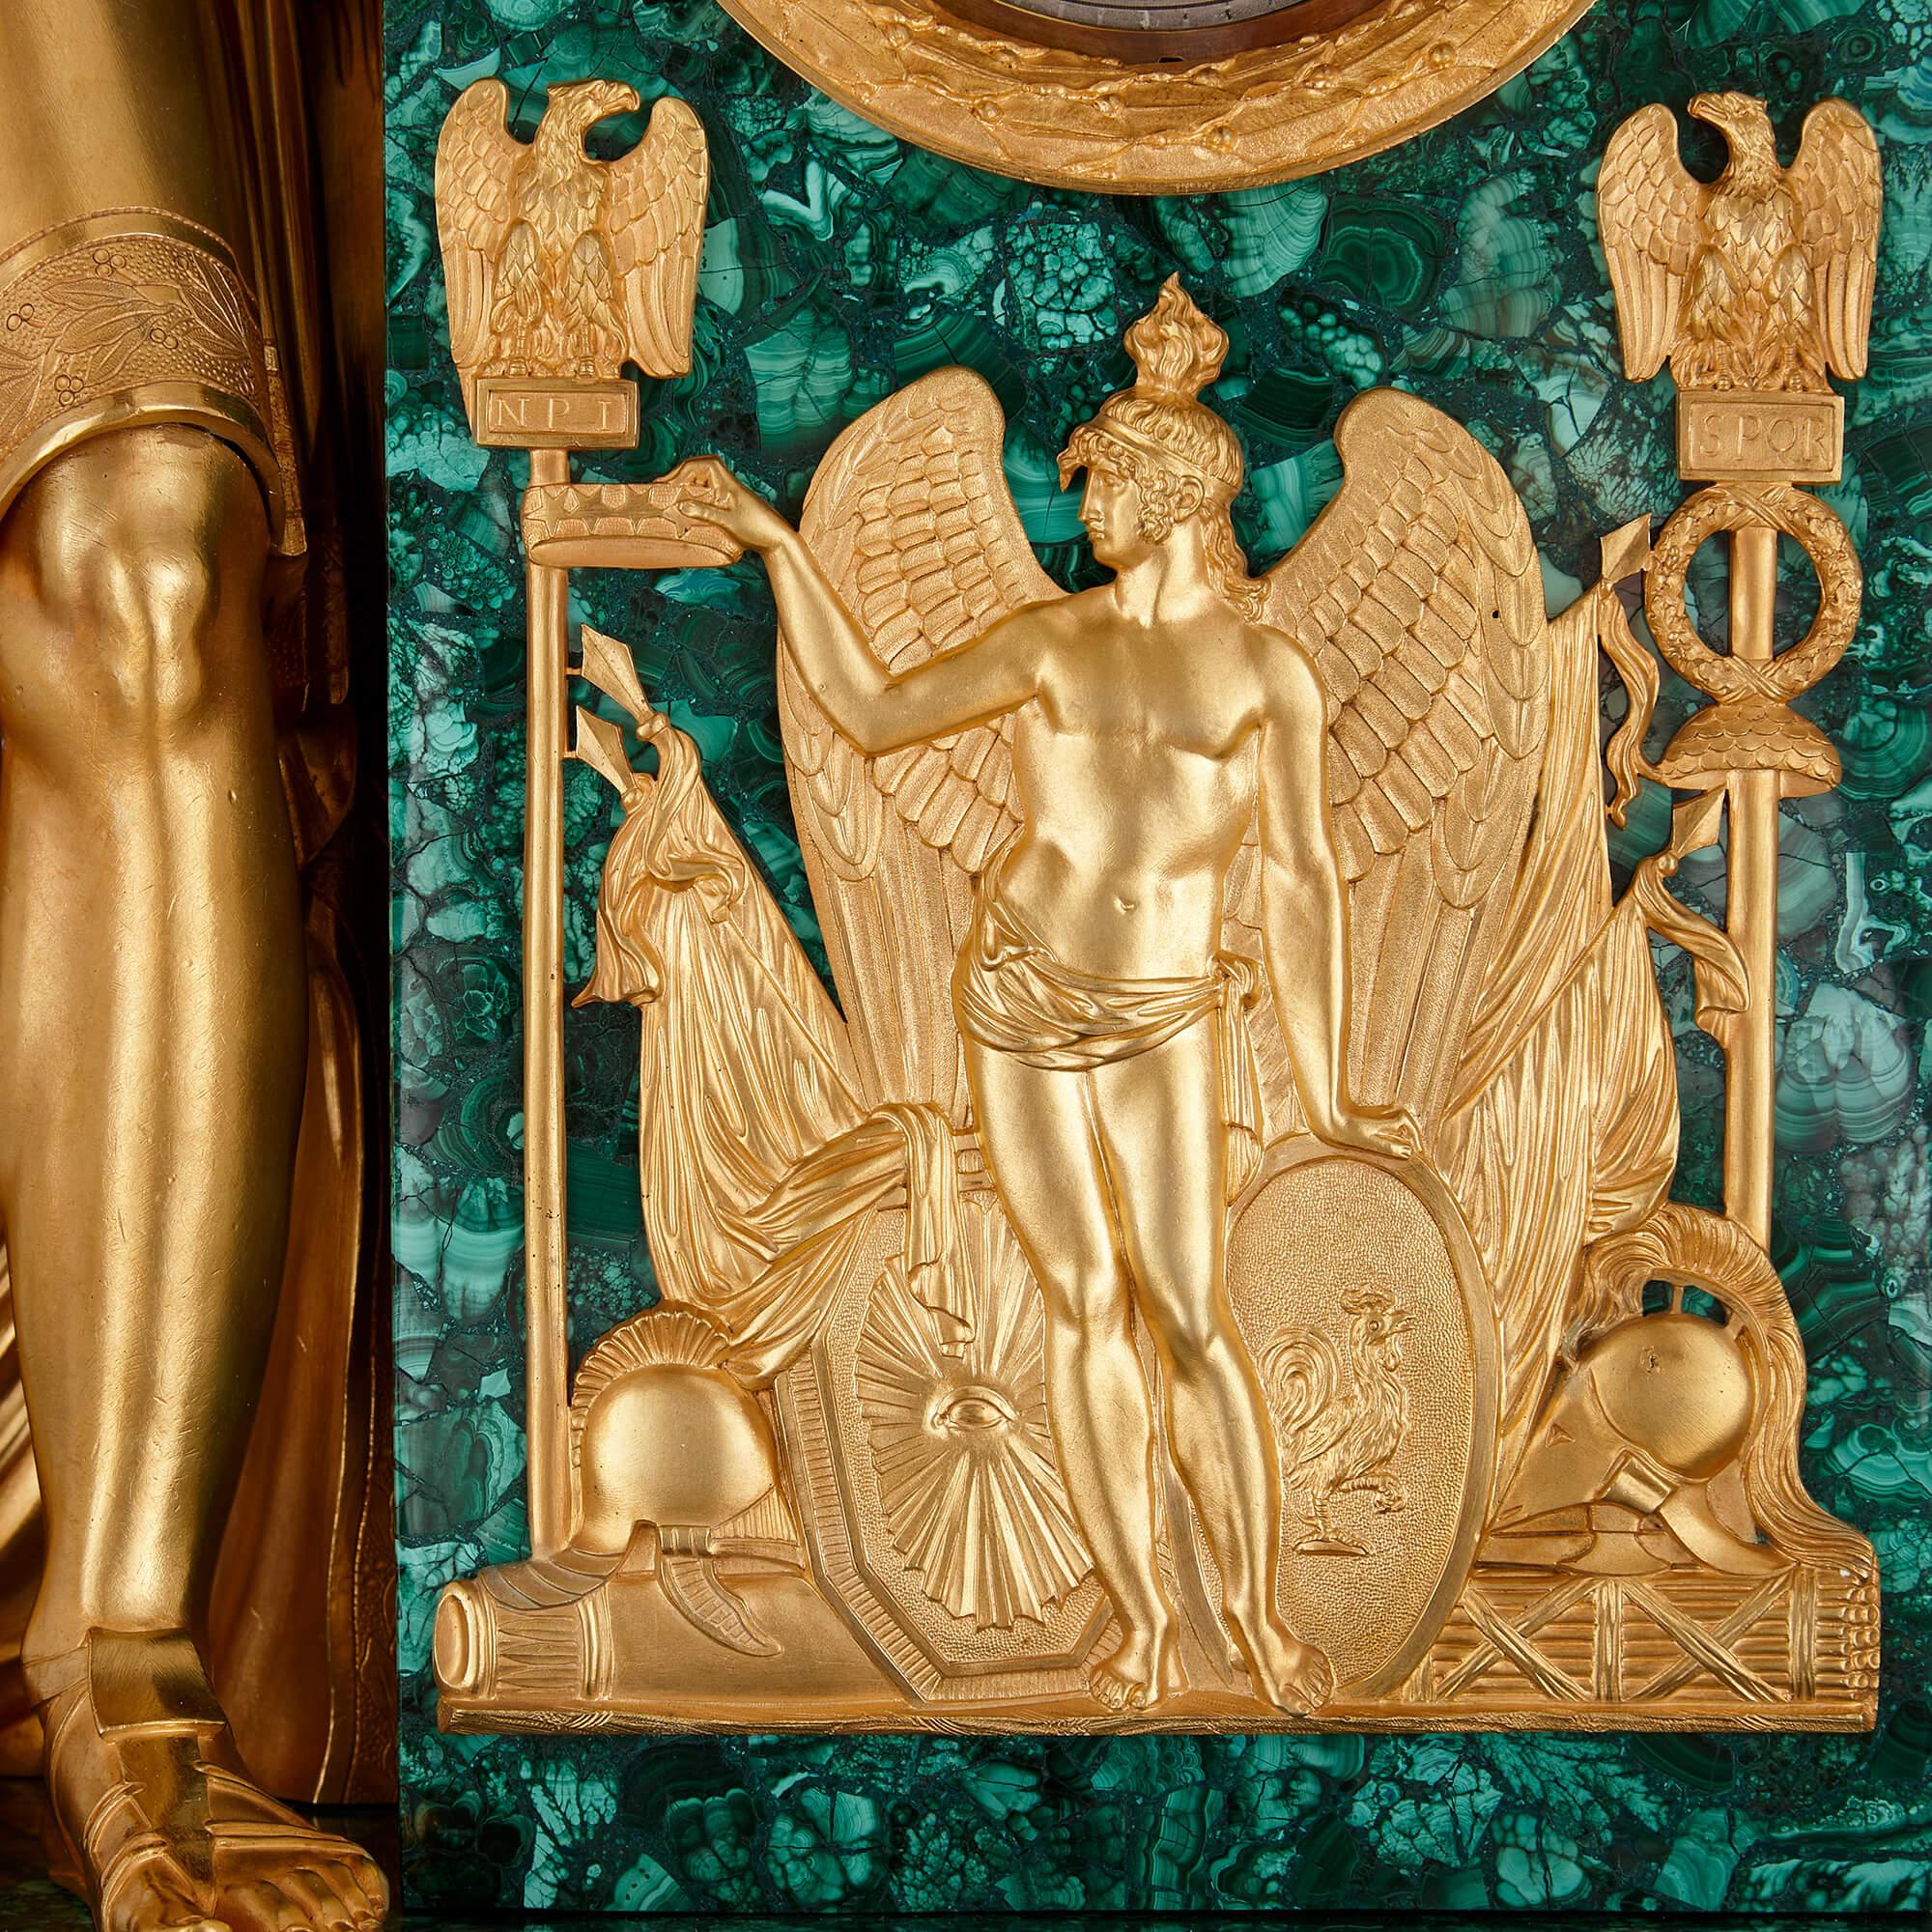 19th Century Large and Very Fine French Empire Period Ormolu and Malachite Mantel Clock For Sale